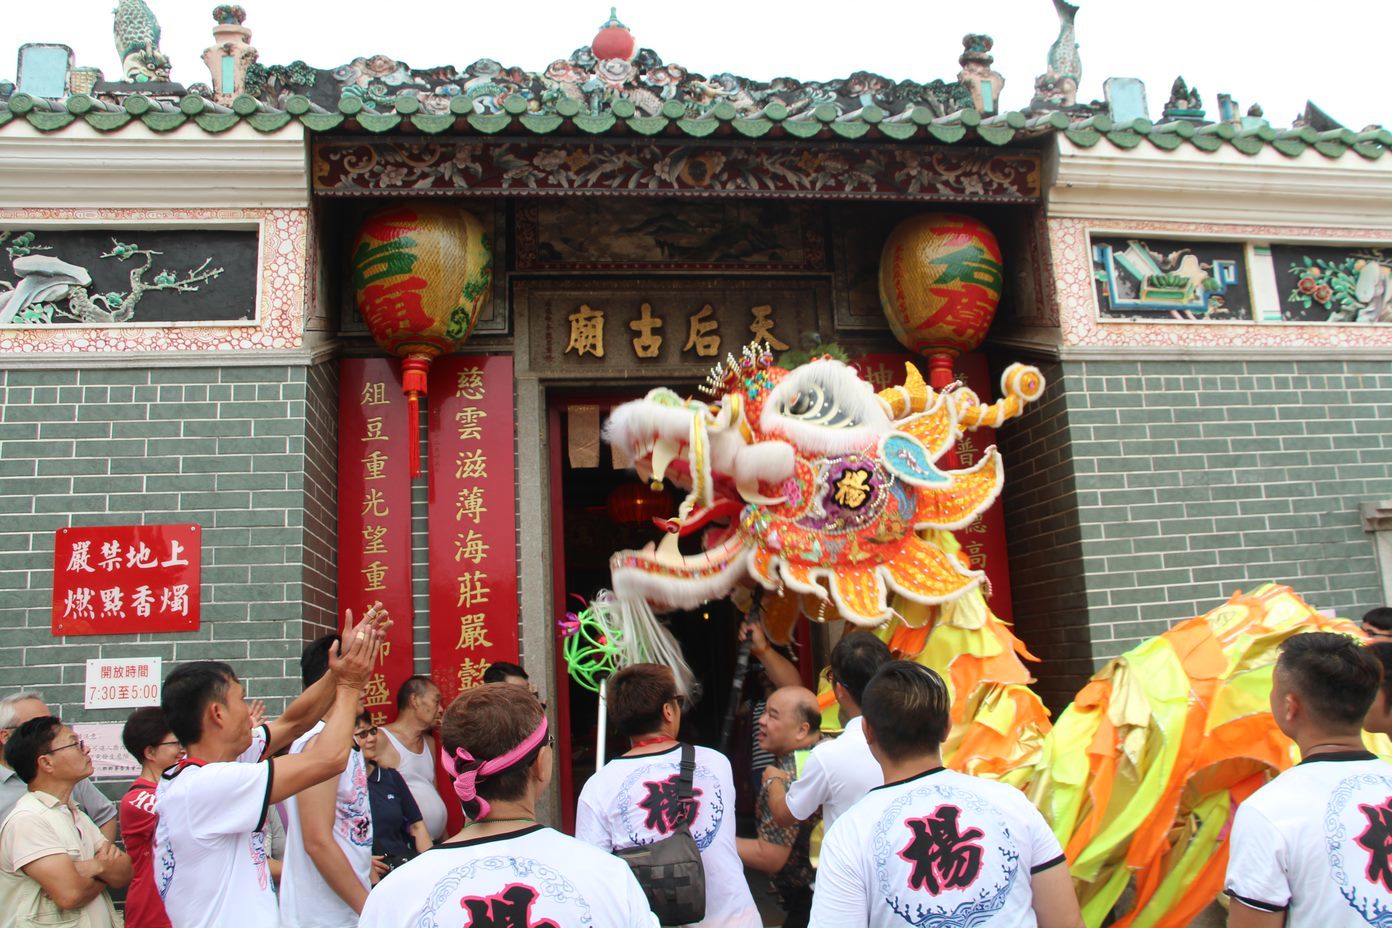 Every year, dozens of Tin Hau temples in the city celebrate the goddess of the sea’s birthday with flamboyant processions of dragon, lion, and unicorn dances.